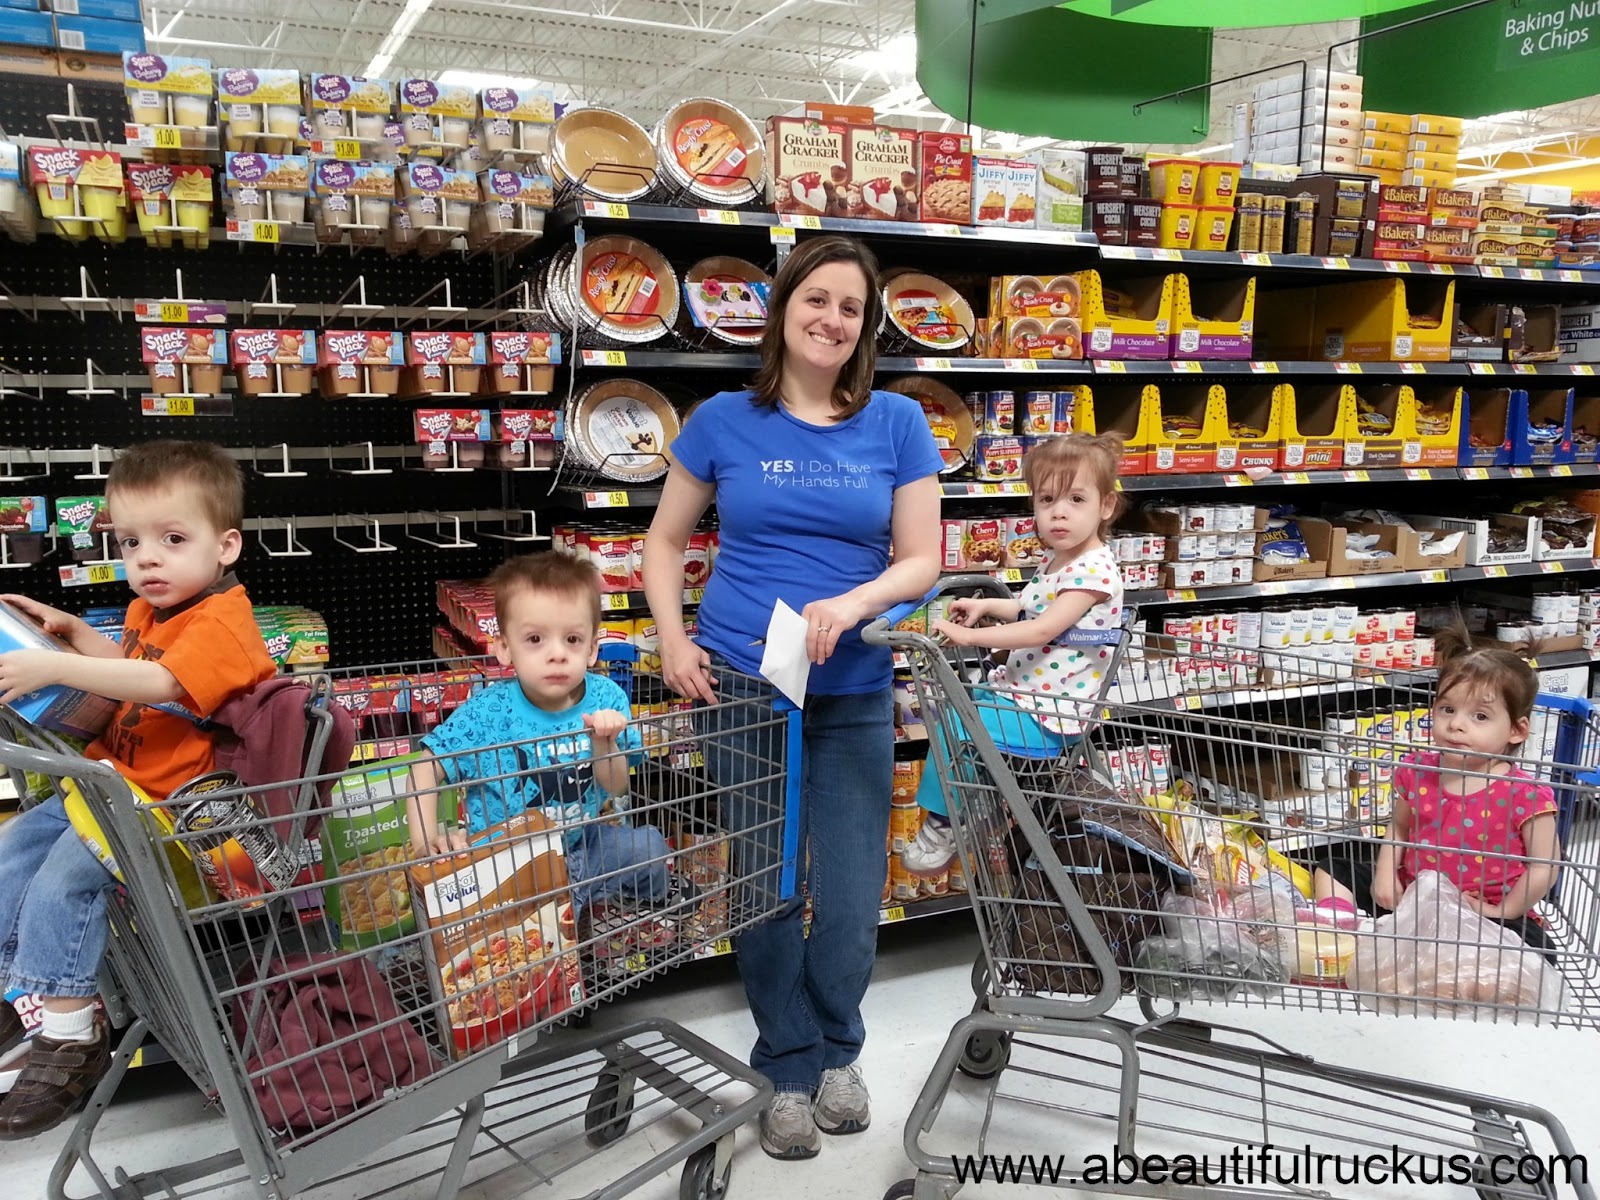 Review: I Went Grocery Shopping at Walmart for the First Time